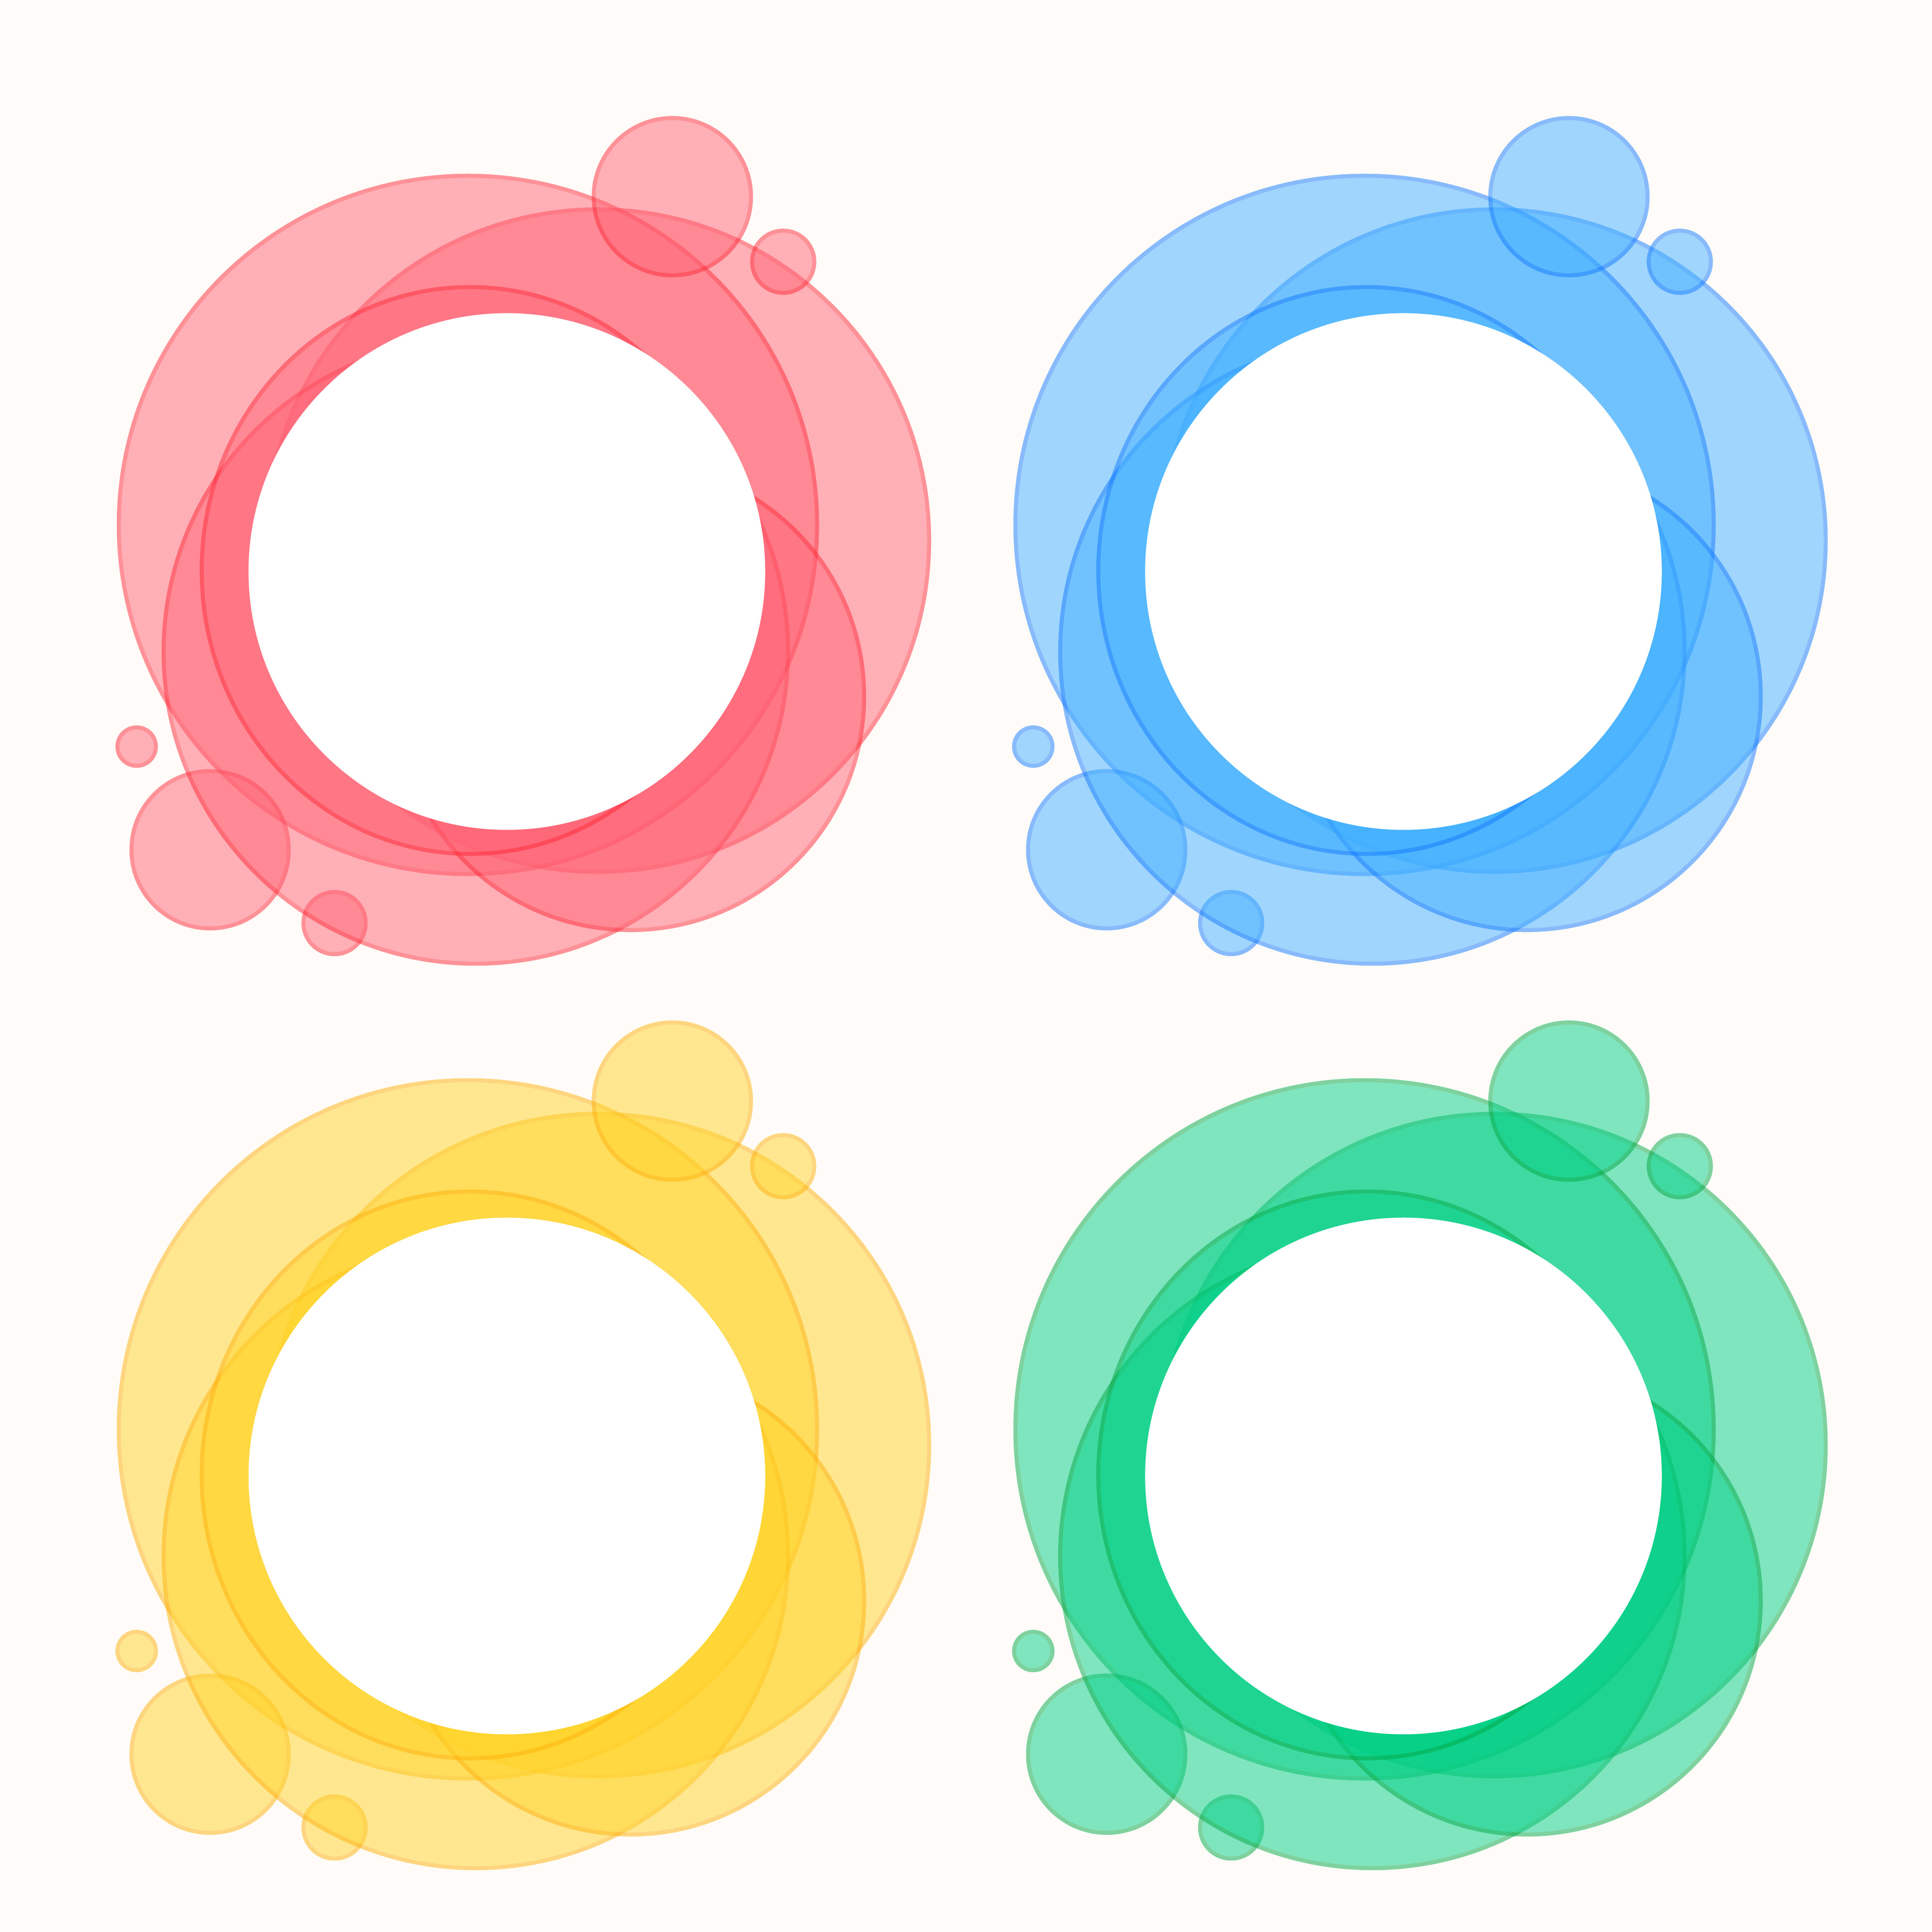 colorful set of circle round frames - Download Free Vector Art, Stock